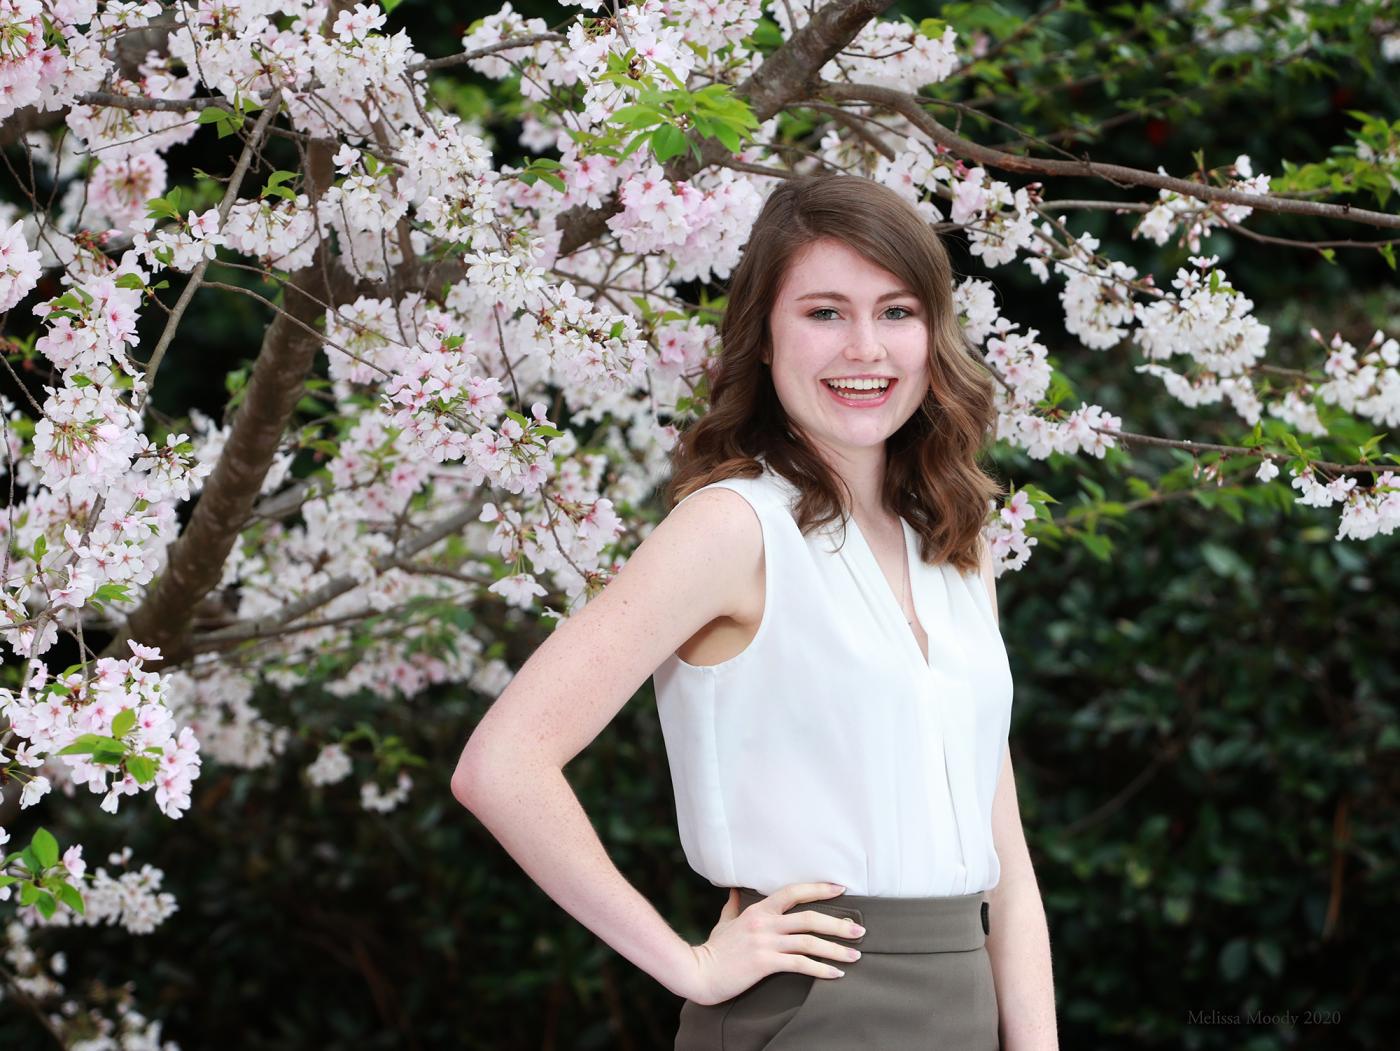 Kayli Moody poses in front of a white/pink flowering tree.